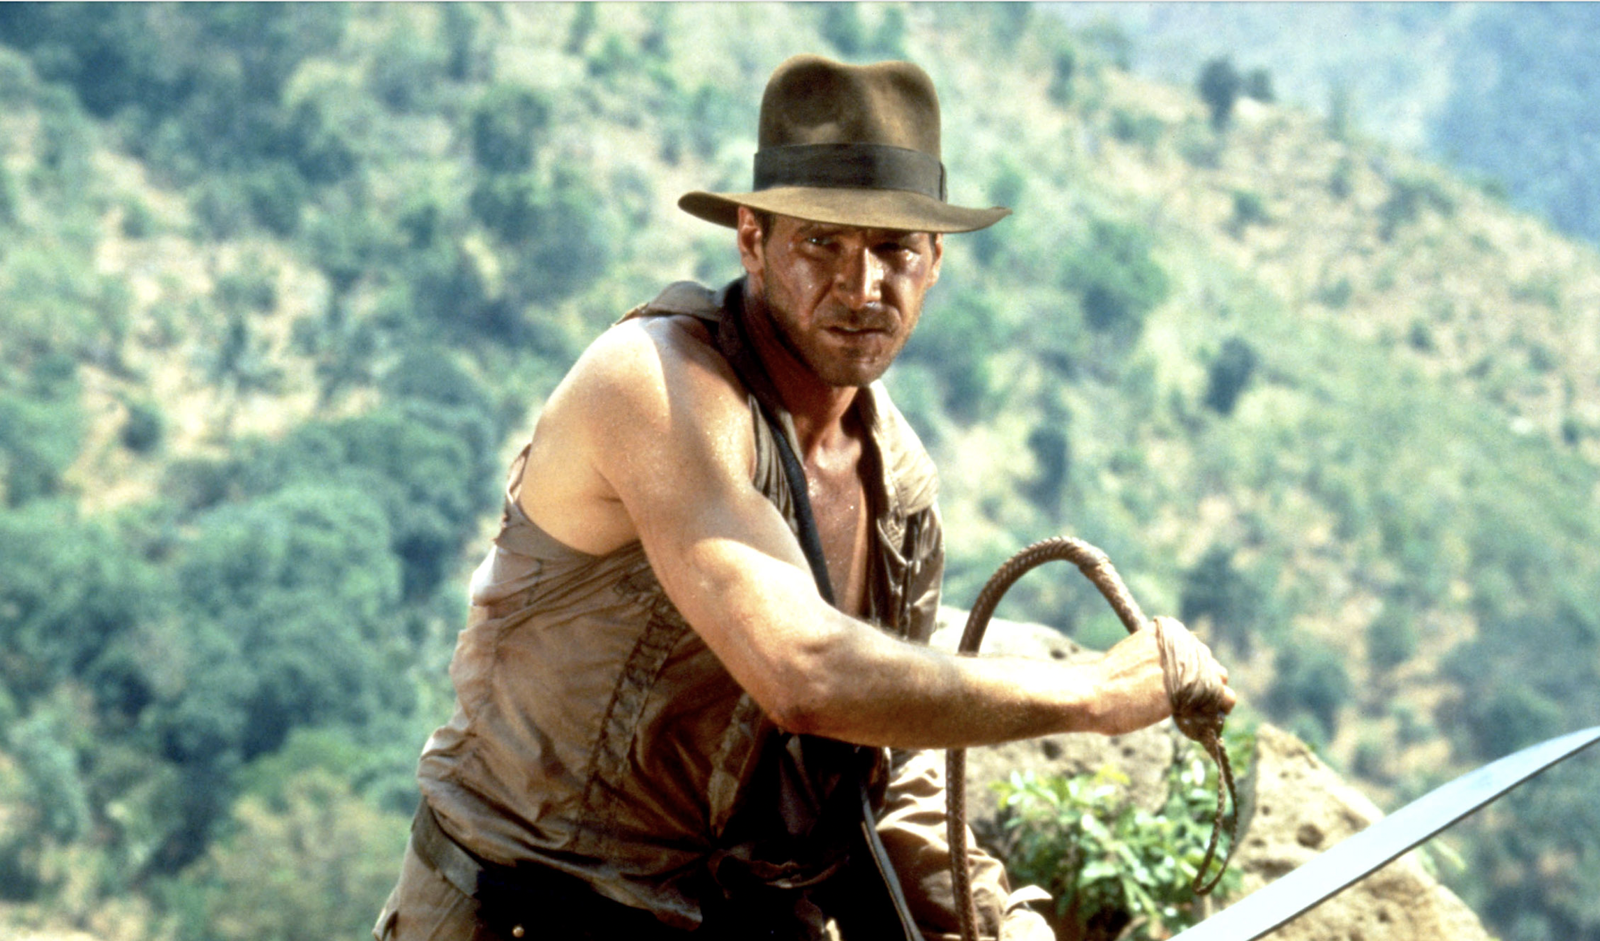 Indiana Jones is one of the most widely acclaimed franchises of all time